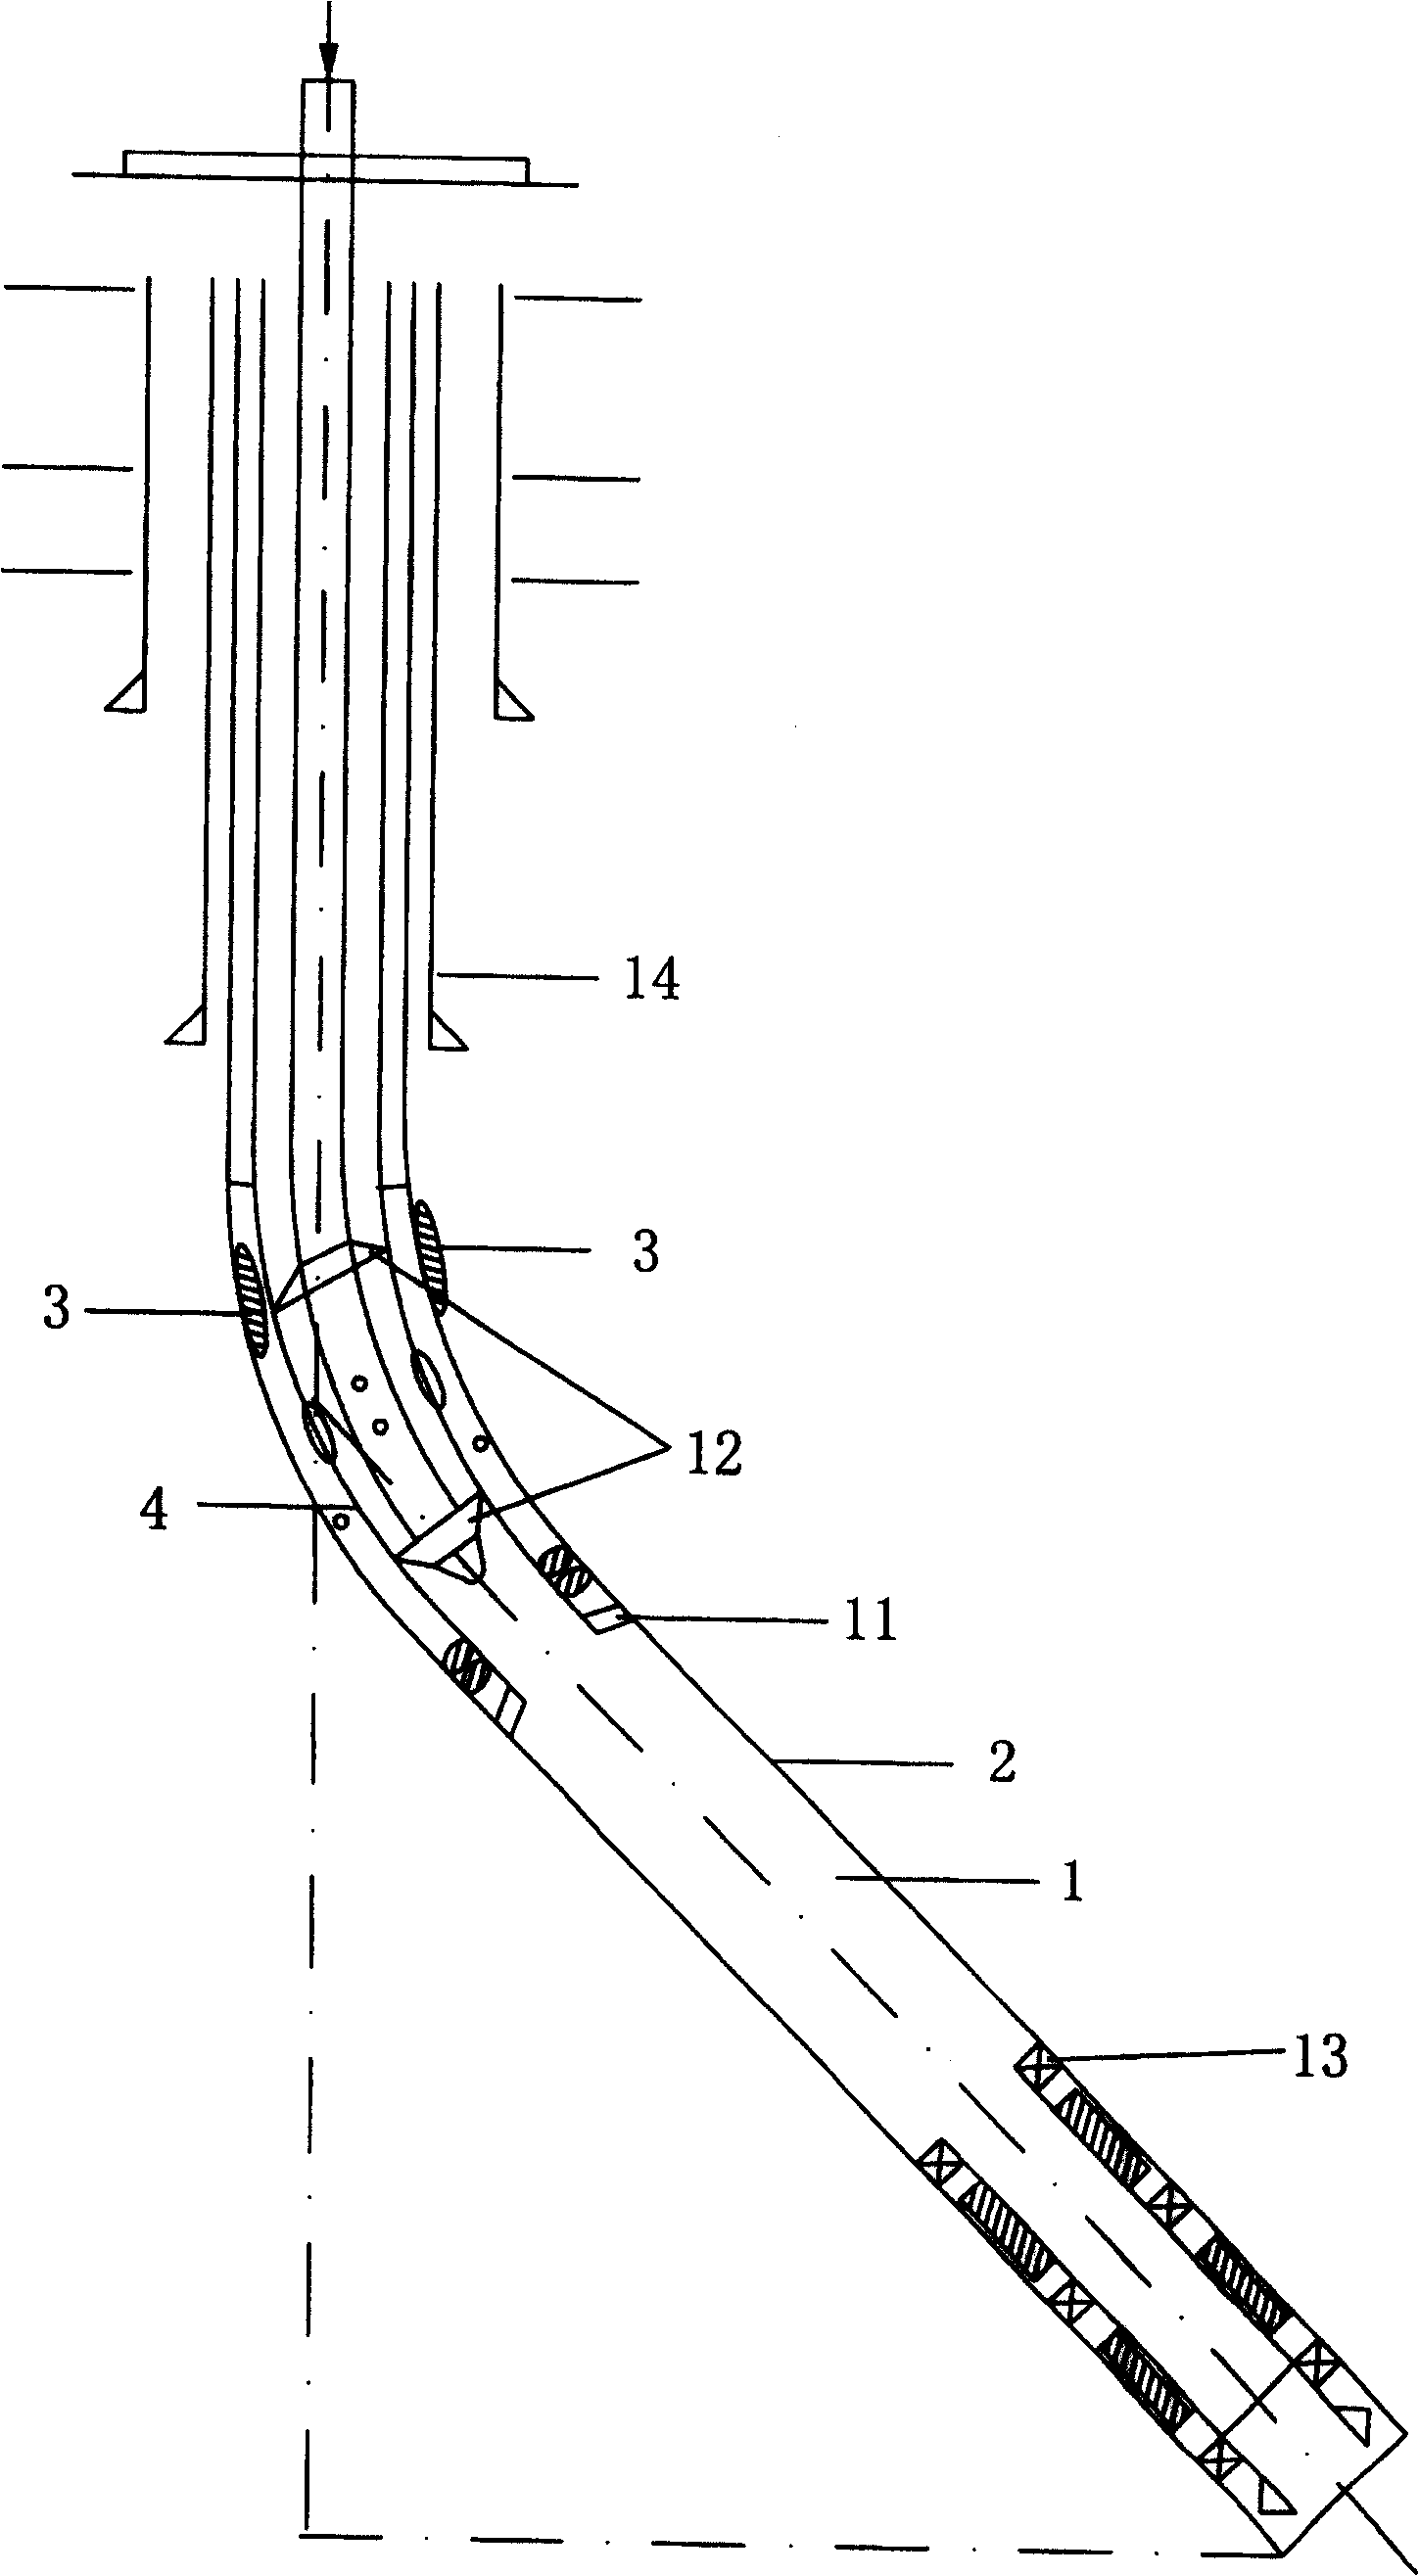 Method and device for repairing oil/gas drilling bushing